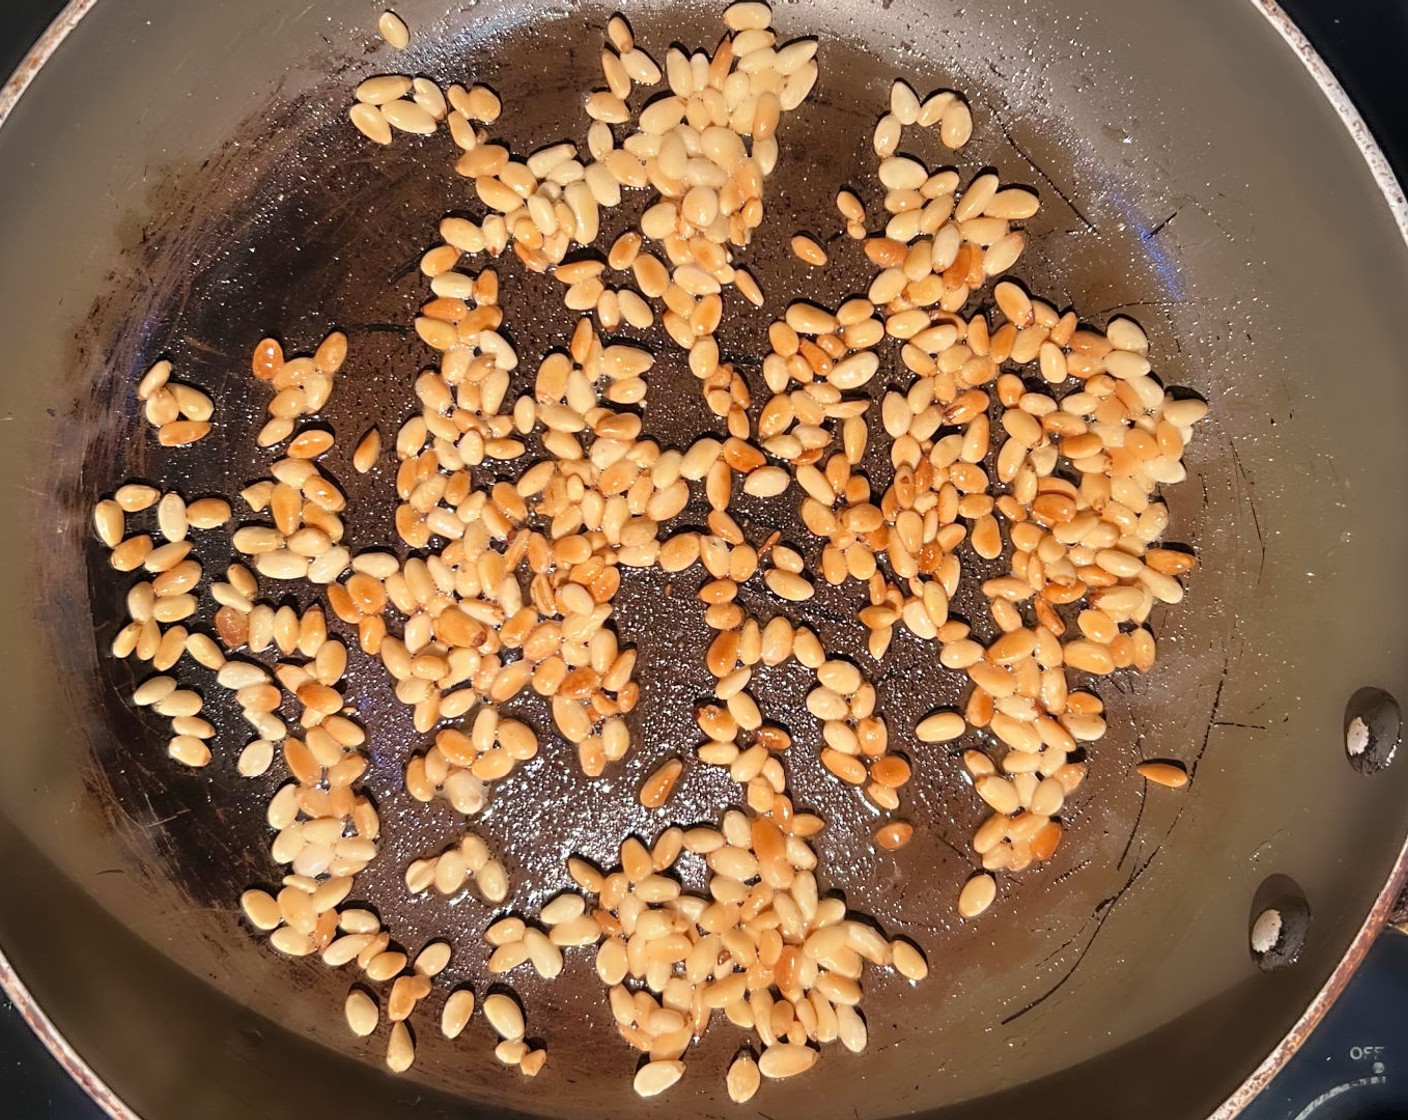 step 3 Heat 1 Tbsp of Olive Oil (1 Tbsp) on a skillet and toast the Pine Nuts (1/2 cup) until golden brown. Transfer to a bowl and set aside.